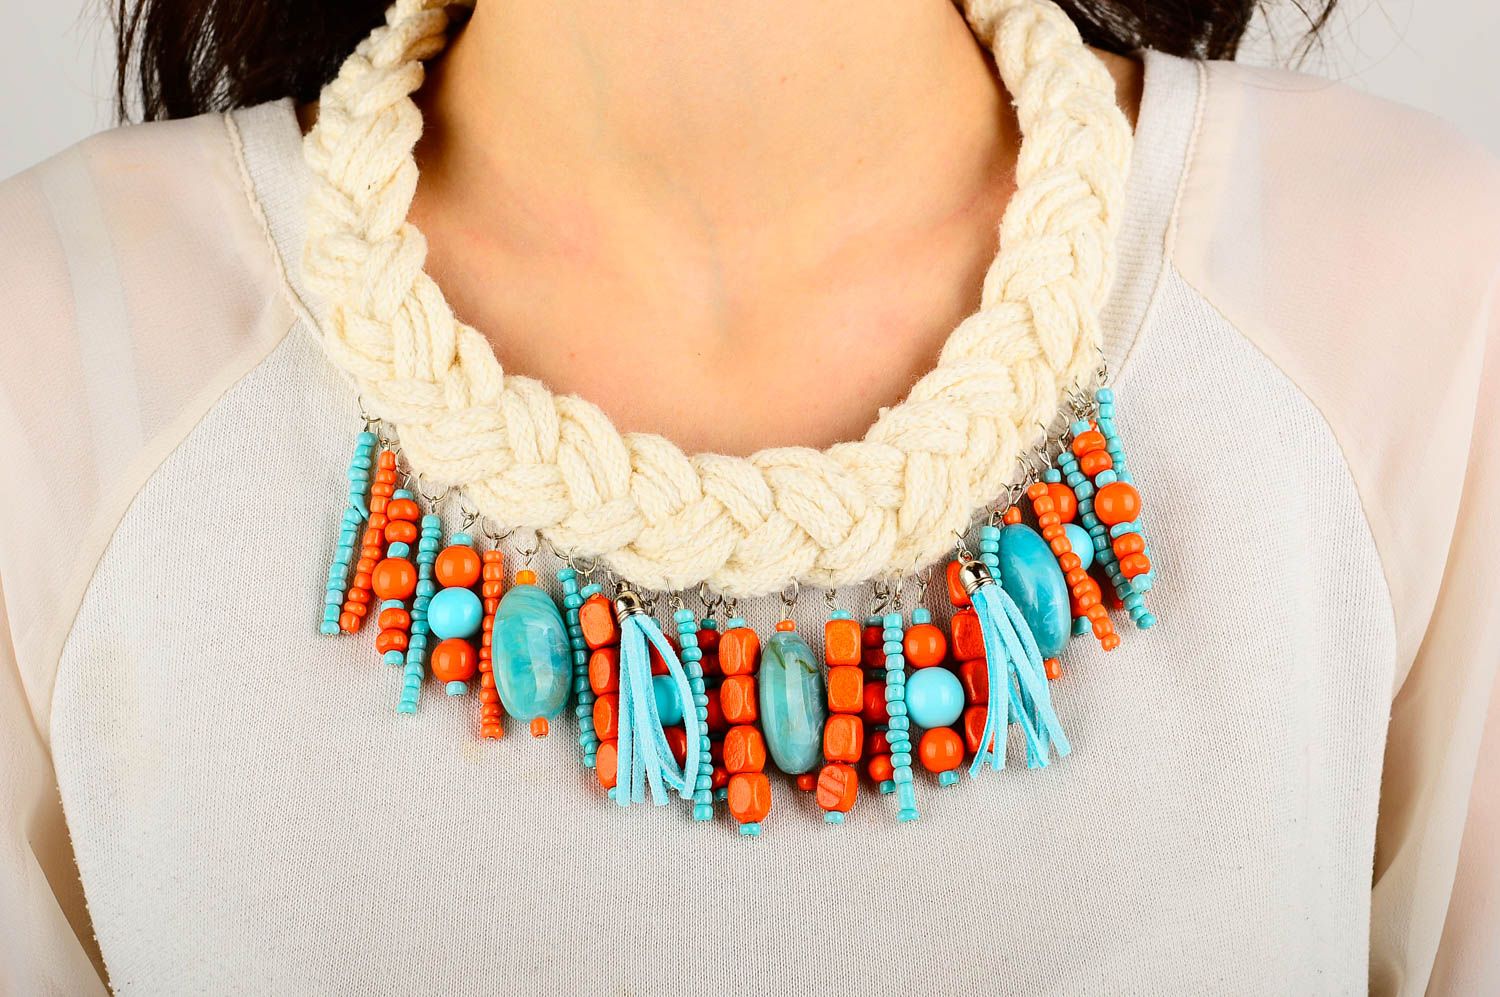 Unusual handmade textile necklace cool jewelry beaded necklace gifts for her photo 1